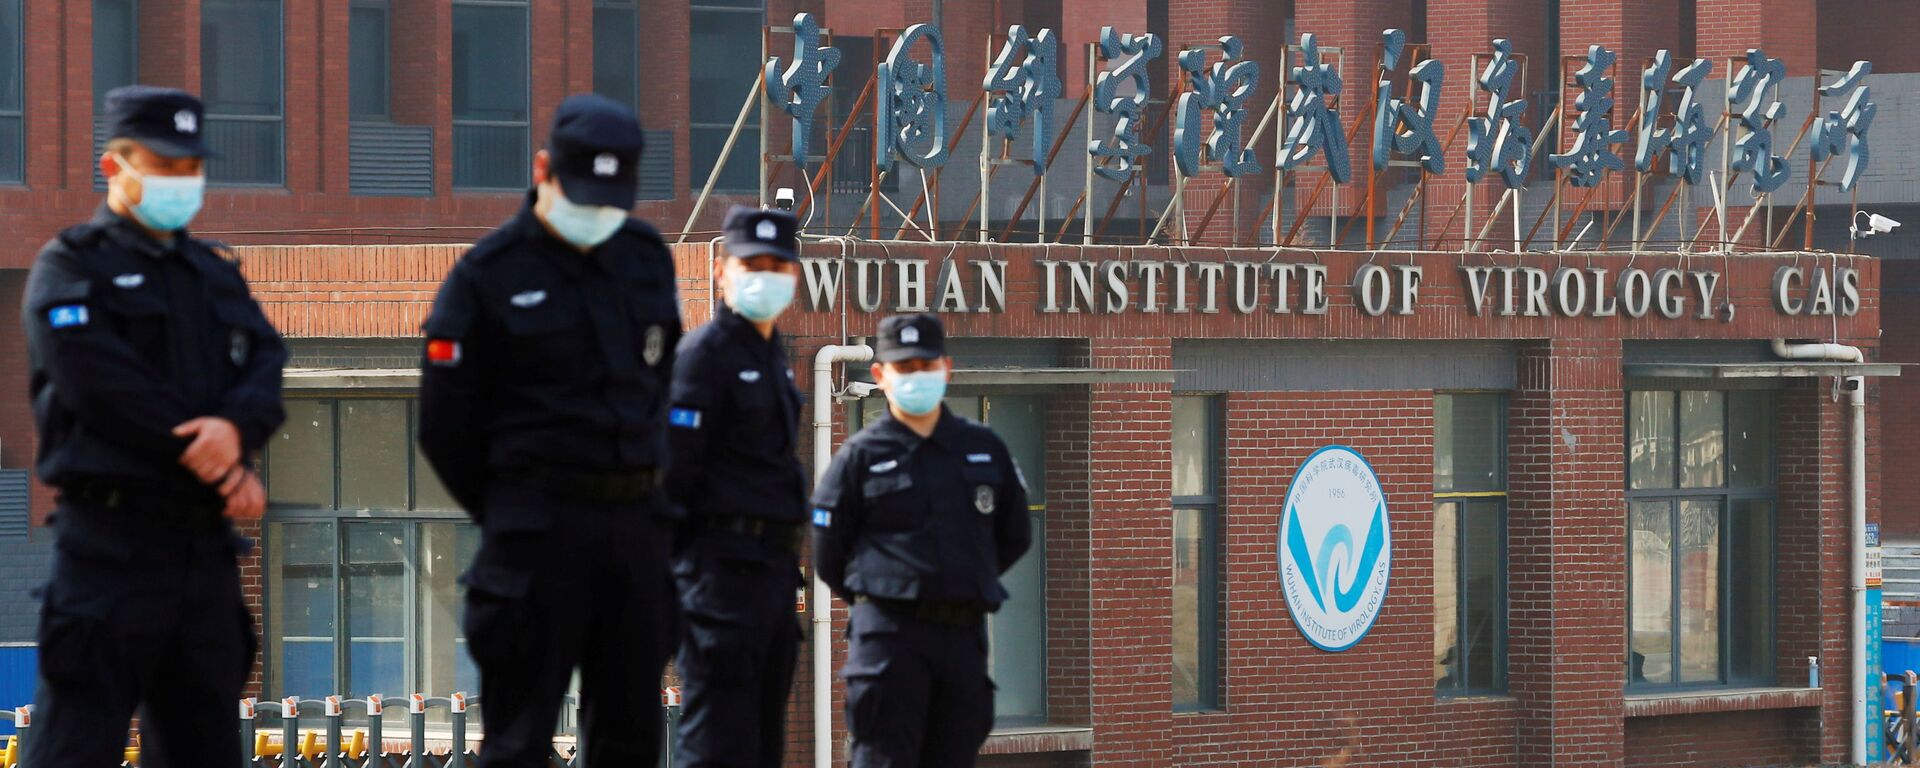 Security personnel keep watch outside Wuhan Institute of Virology during the visit by the World Health Organisation (WHO) team tasked with investigating the origins of the coronavirus disease (COVID-19), in Wuhan, Hubei province, China, 3 February 2021 - Sputnik International, 1920, 05.09.2021